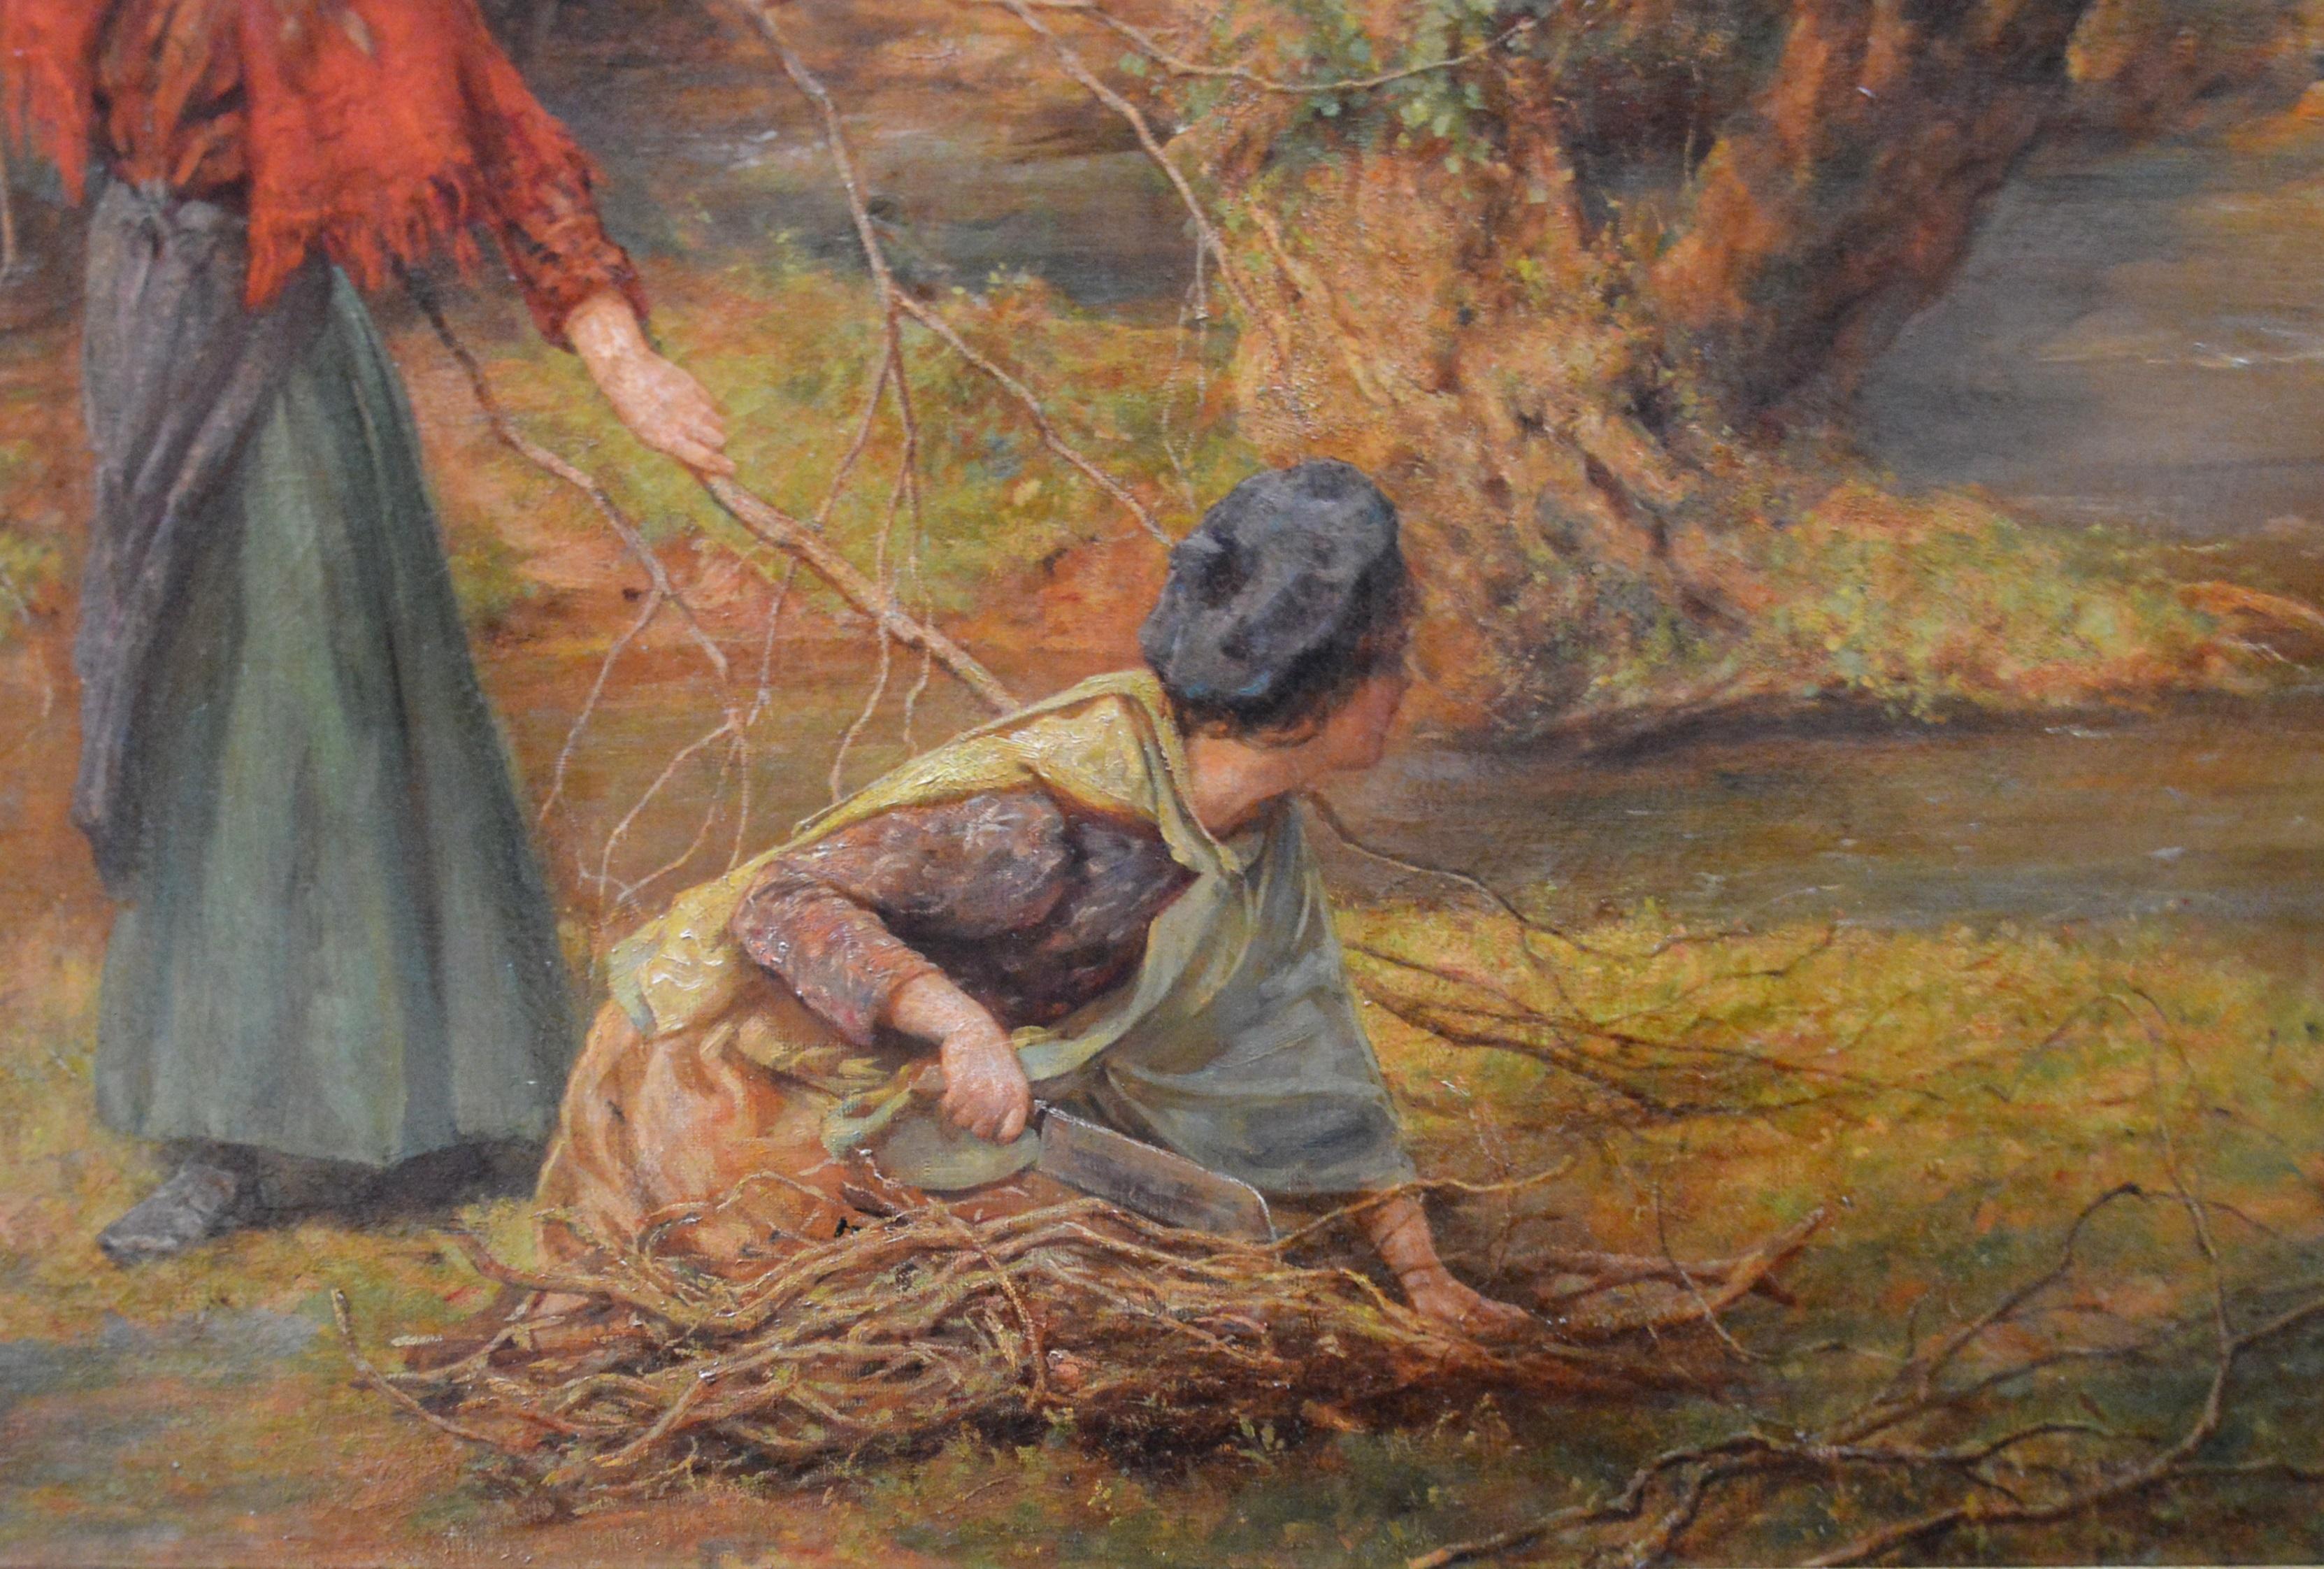 ‘Children of the New Forest’ by Edgar Barclay (1842-1913).
Depicting two girls gathering kindling in winter woodland, this very large painting is signed by the artist and was exhibited at the Royal Academy in 1901.

All our paintings are sold in the